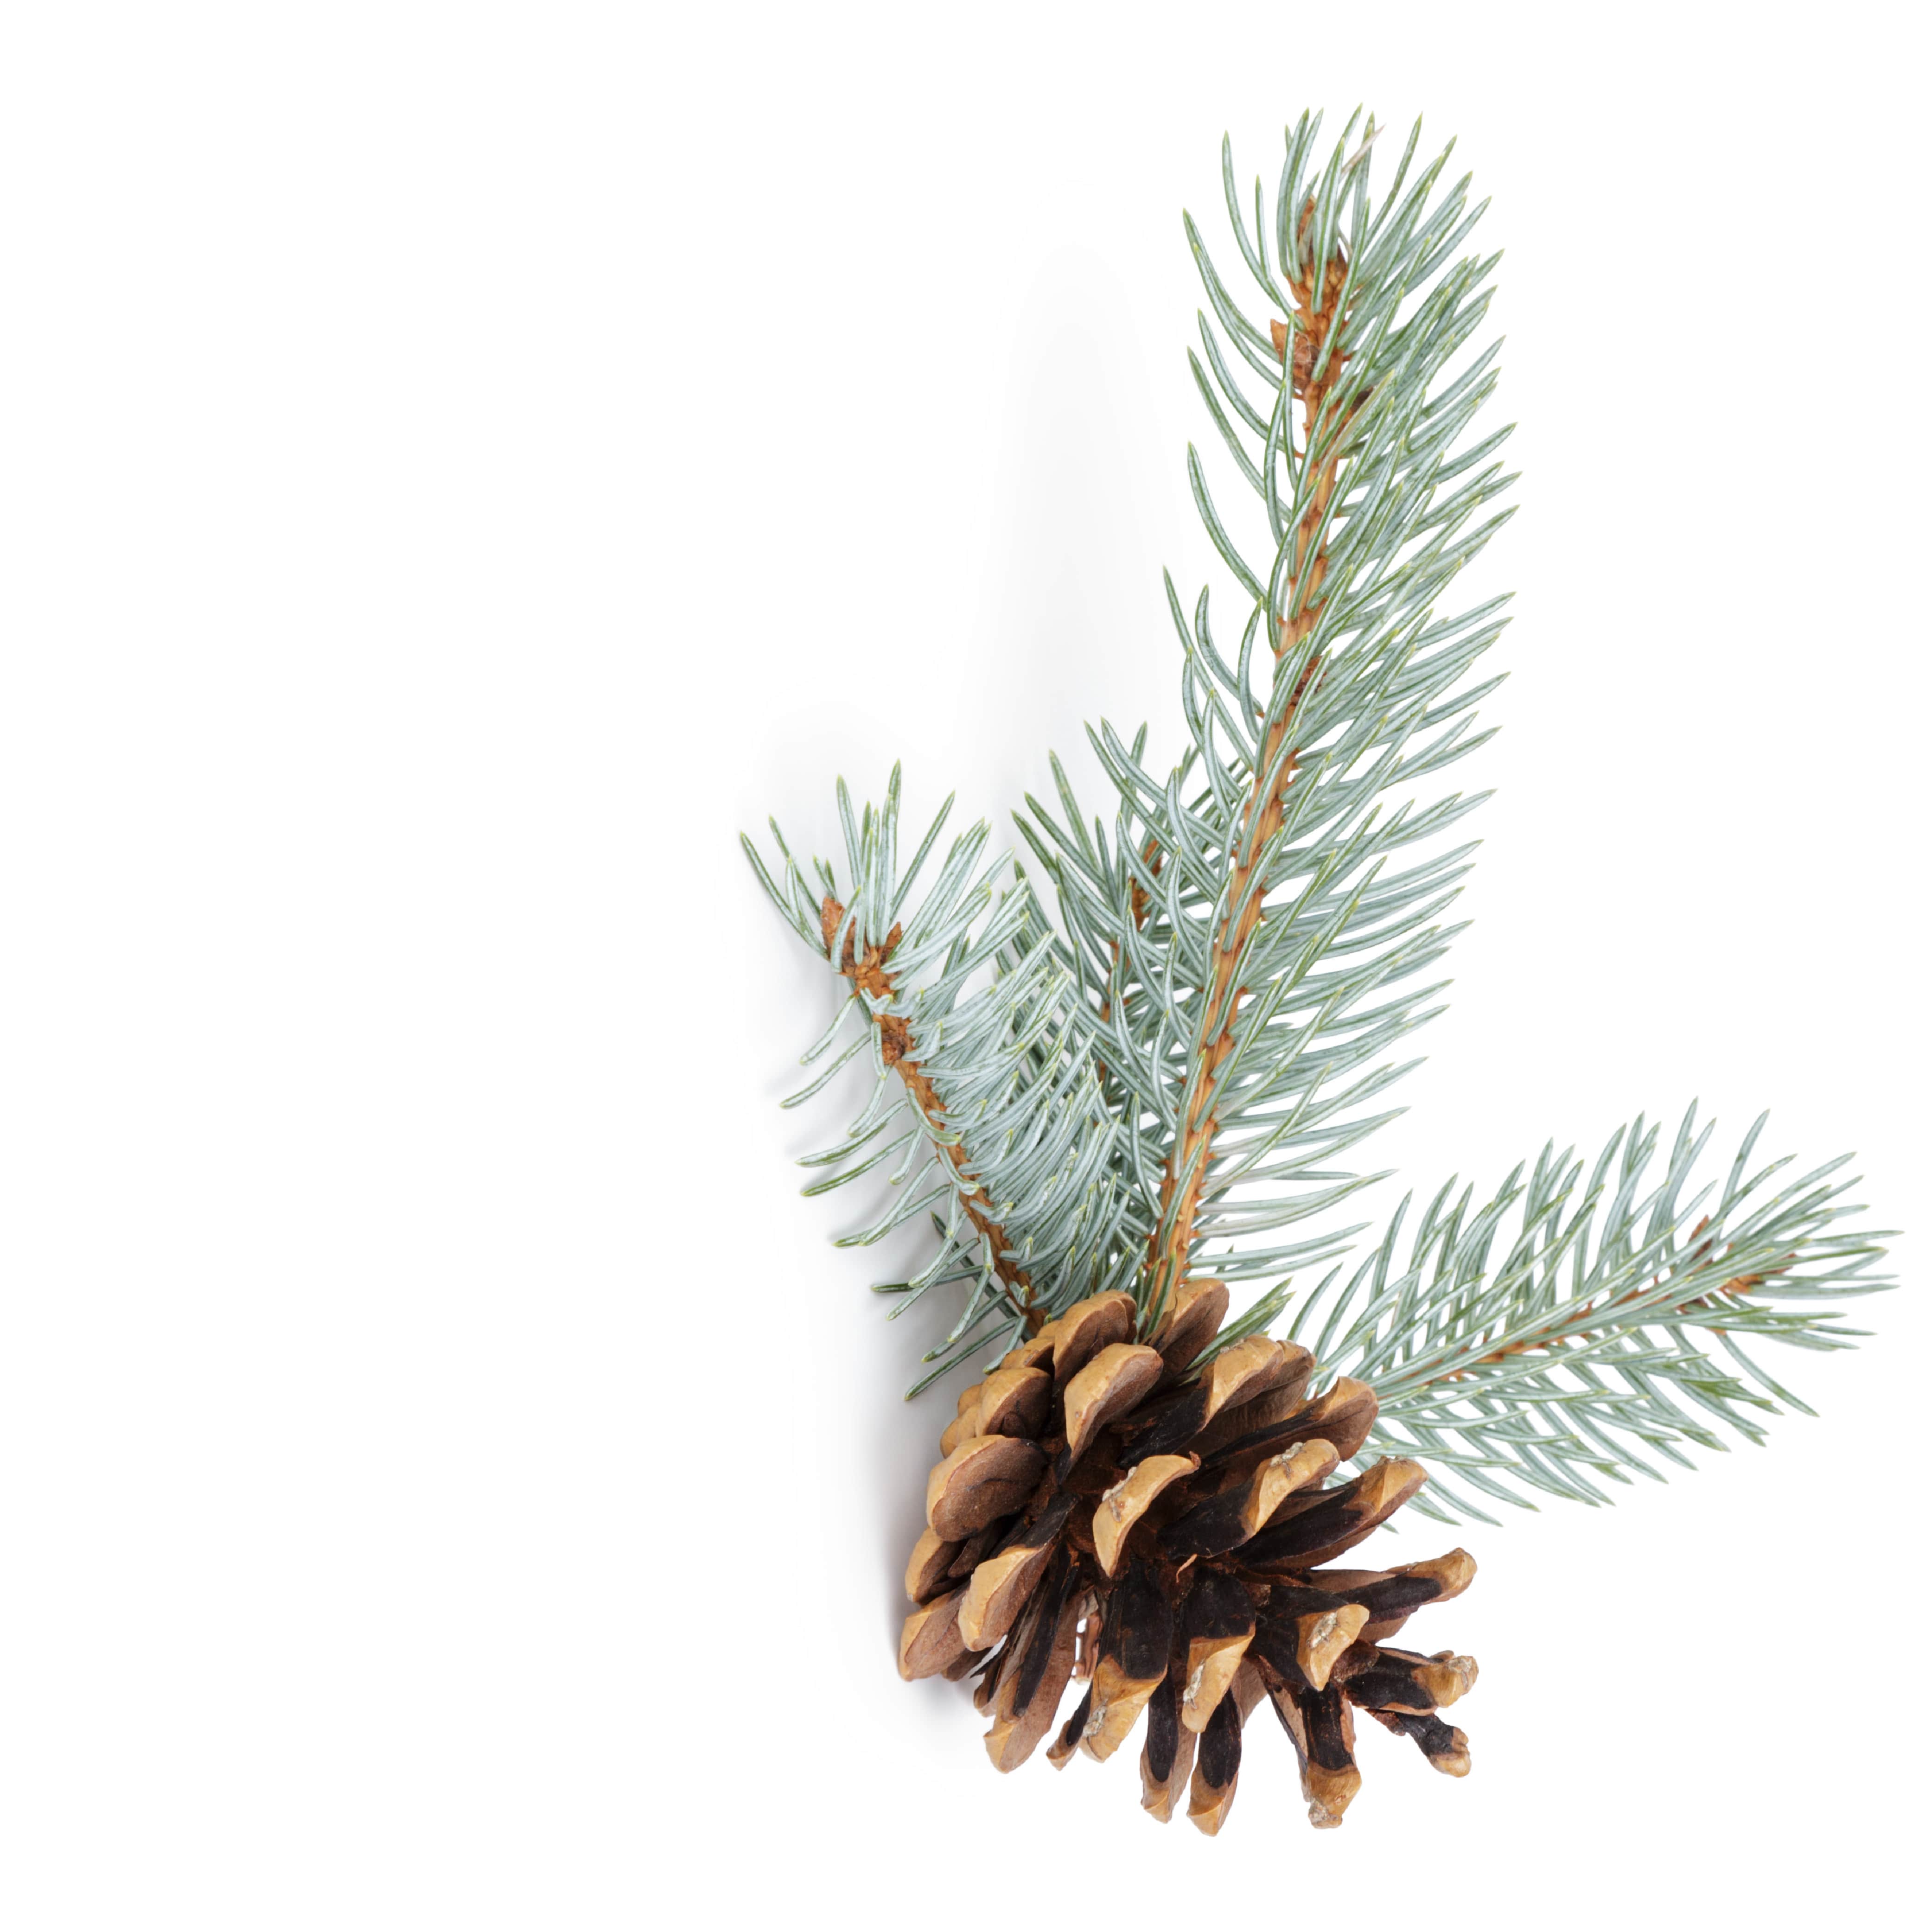 NO. 12 Fragrance Oil for Cold Air Diffusers - Blue Spruce